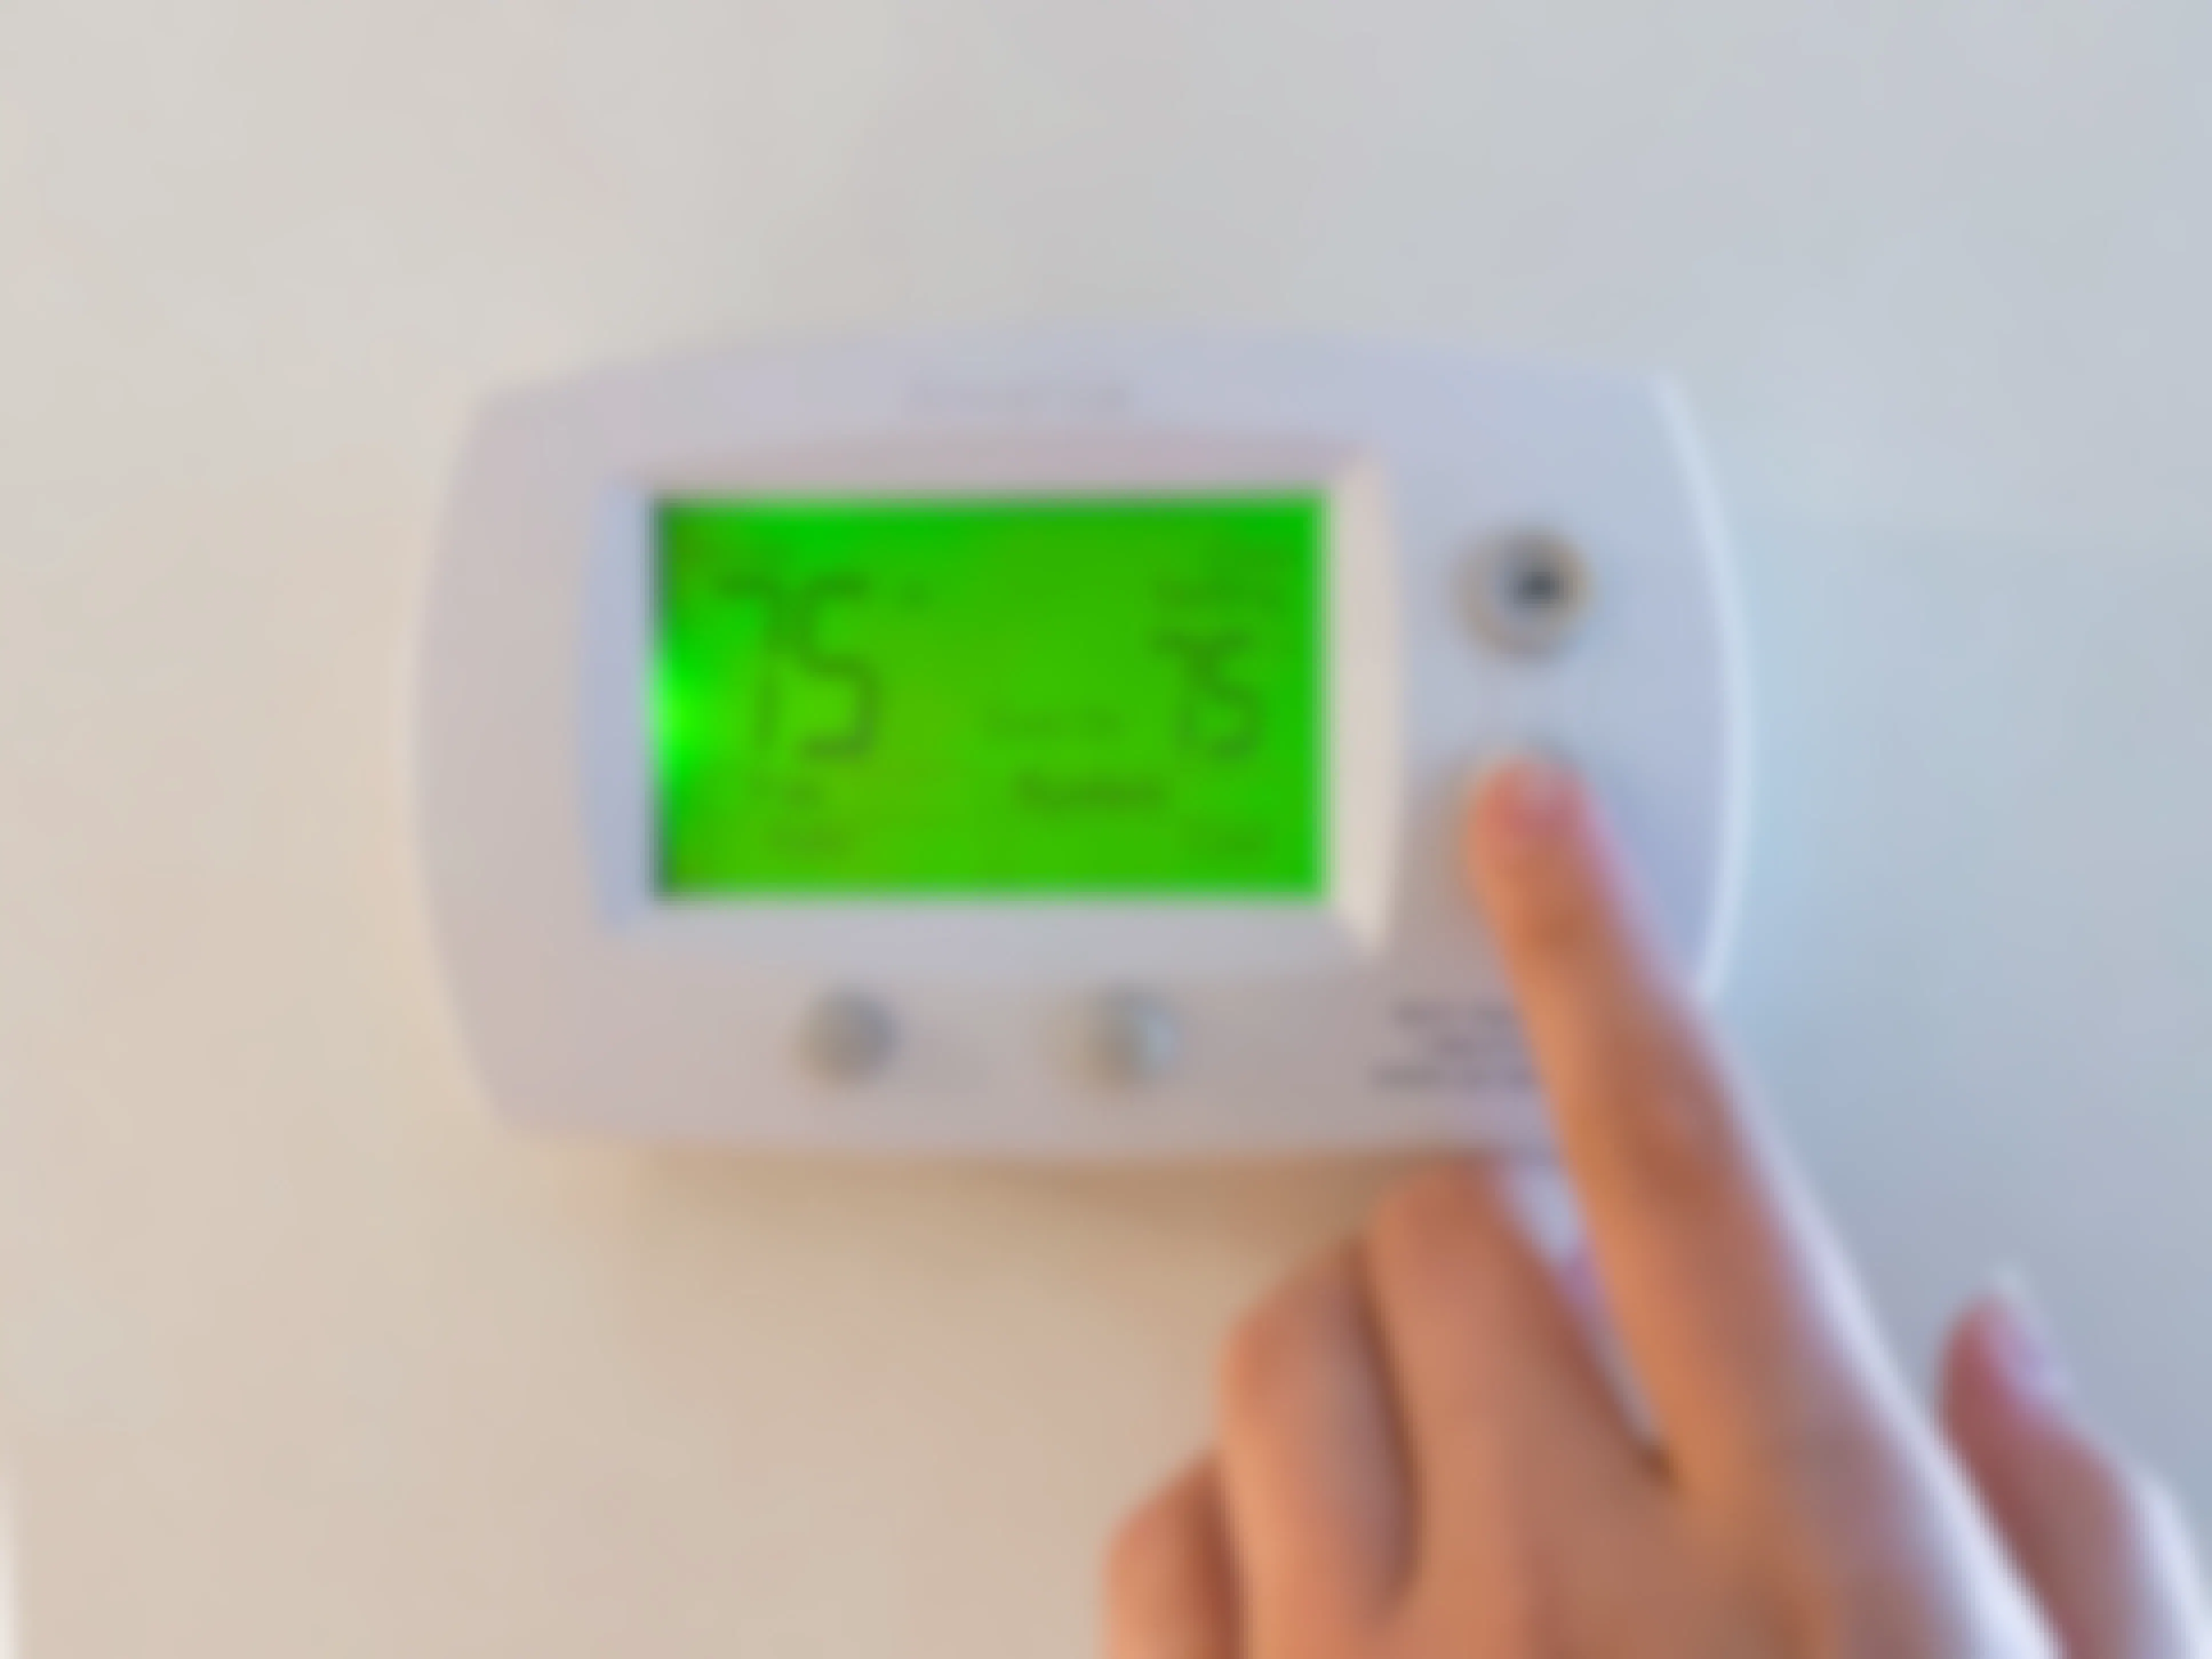 A person's hand going to turn the temperature down on the thermostat which shows 75 degrees Fahrenheit.